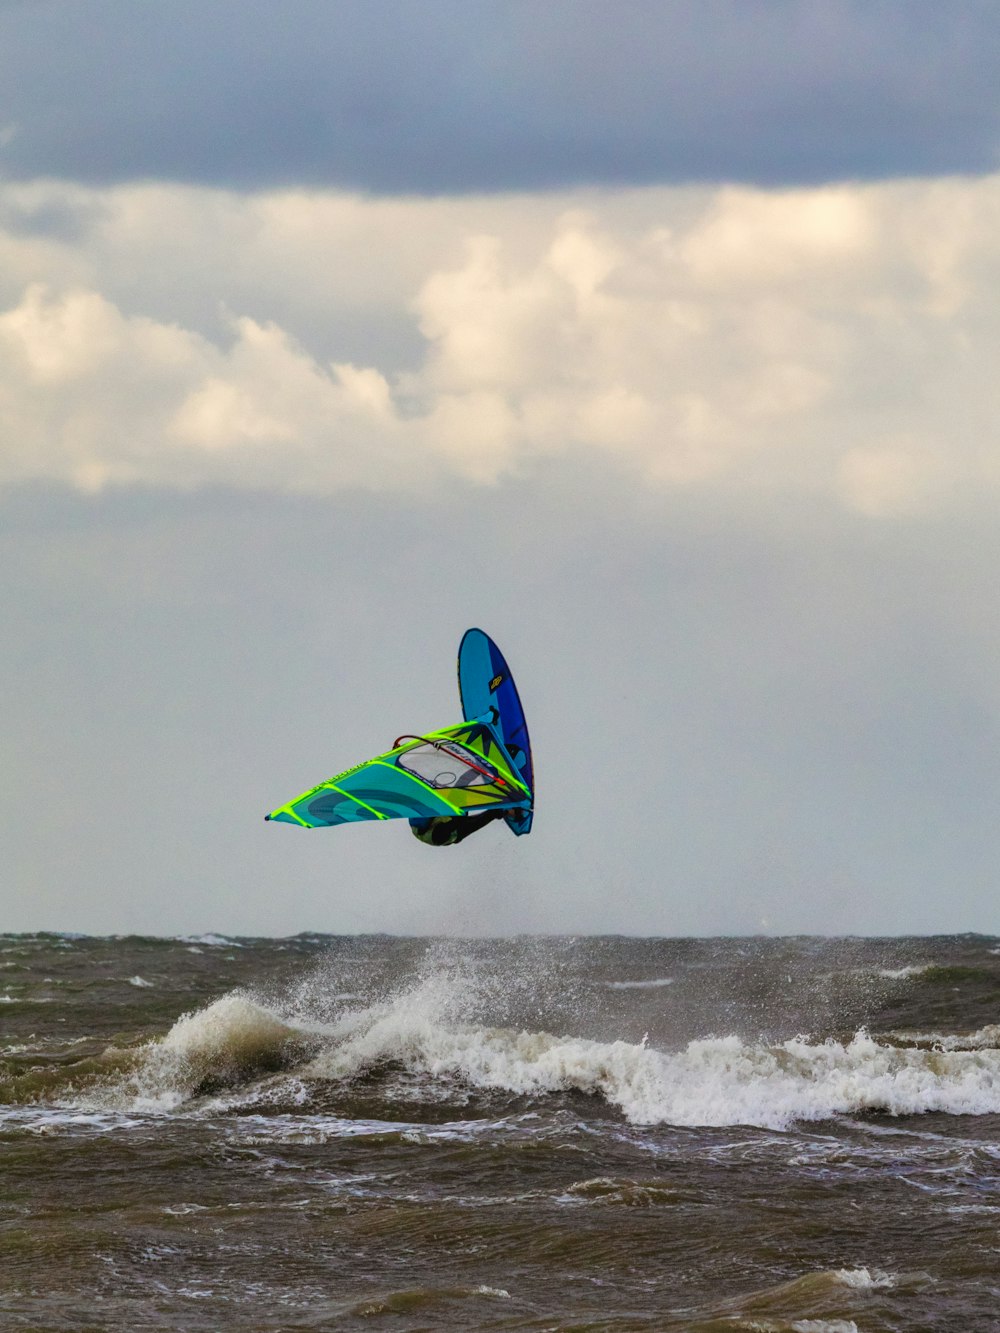 a person windsurfing in the ocean on a cloudy day